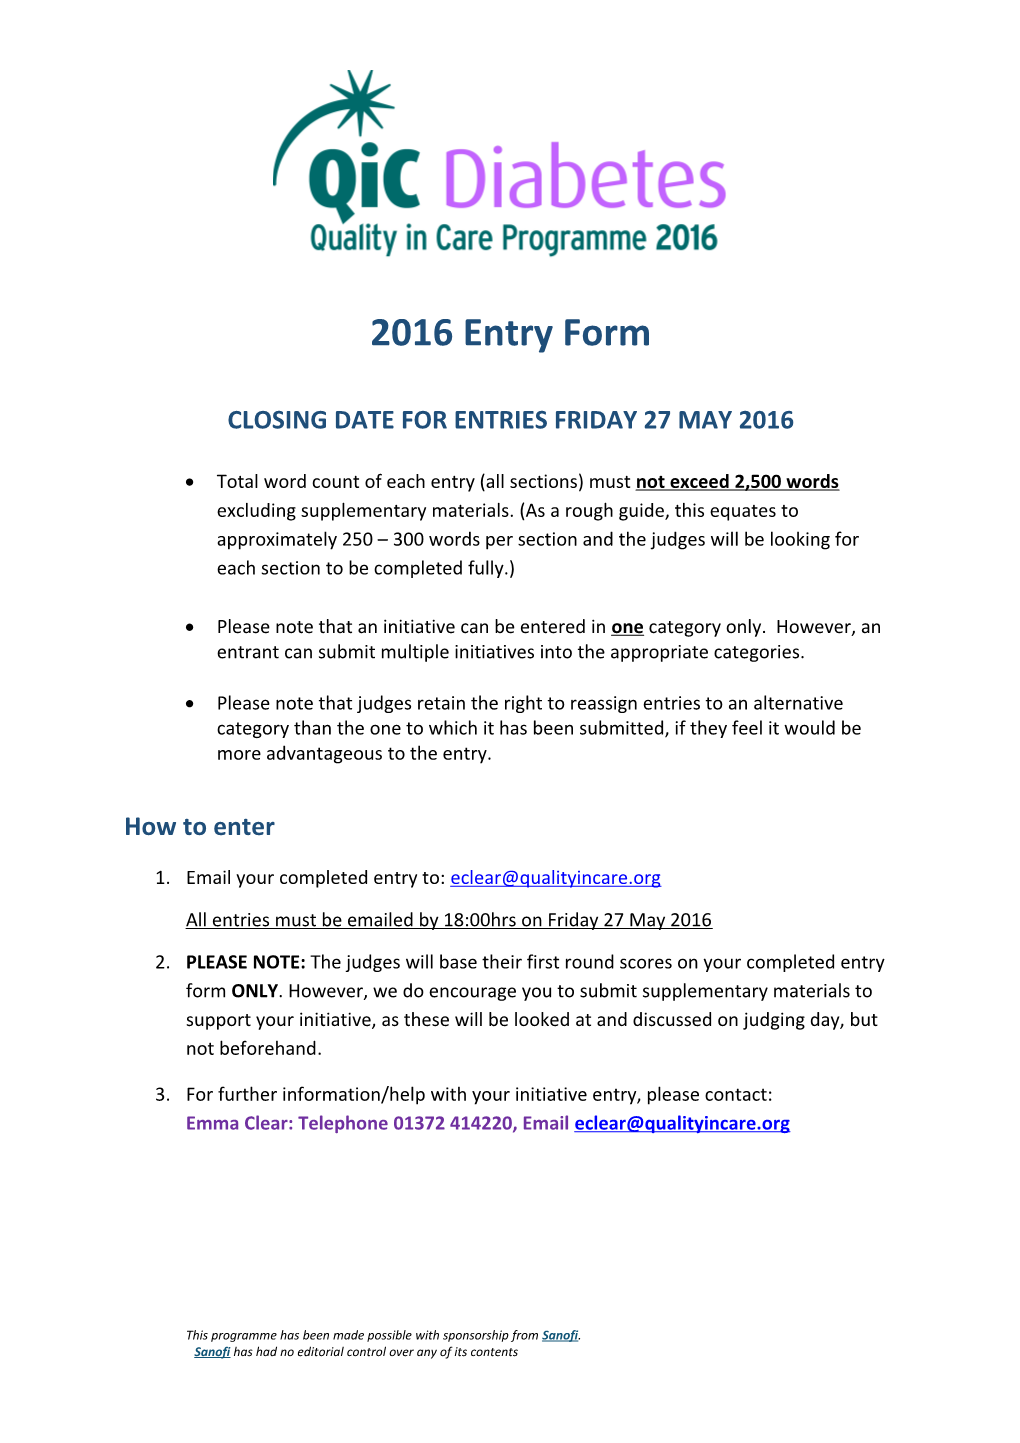 Closing Date for Entries Friday 27 May 2016